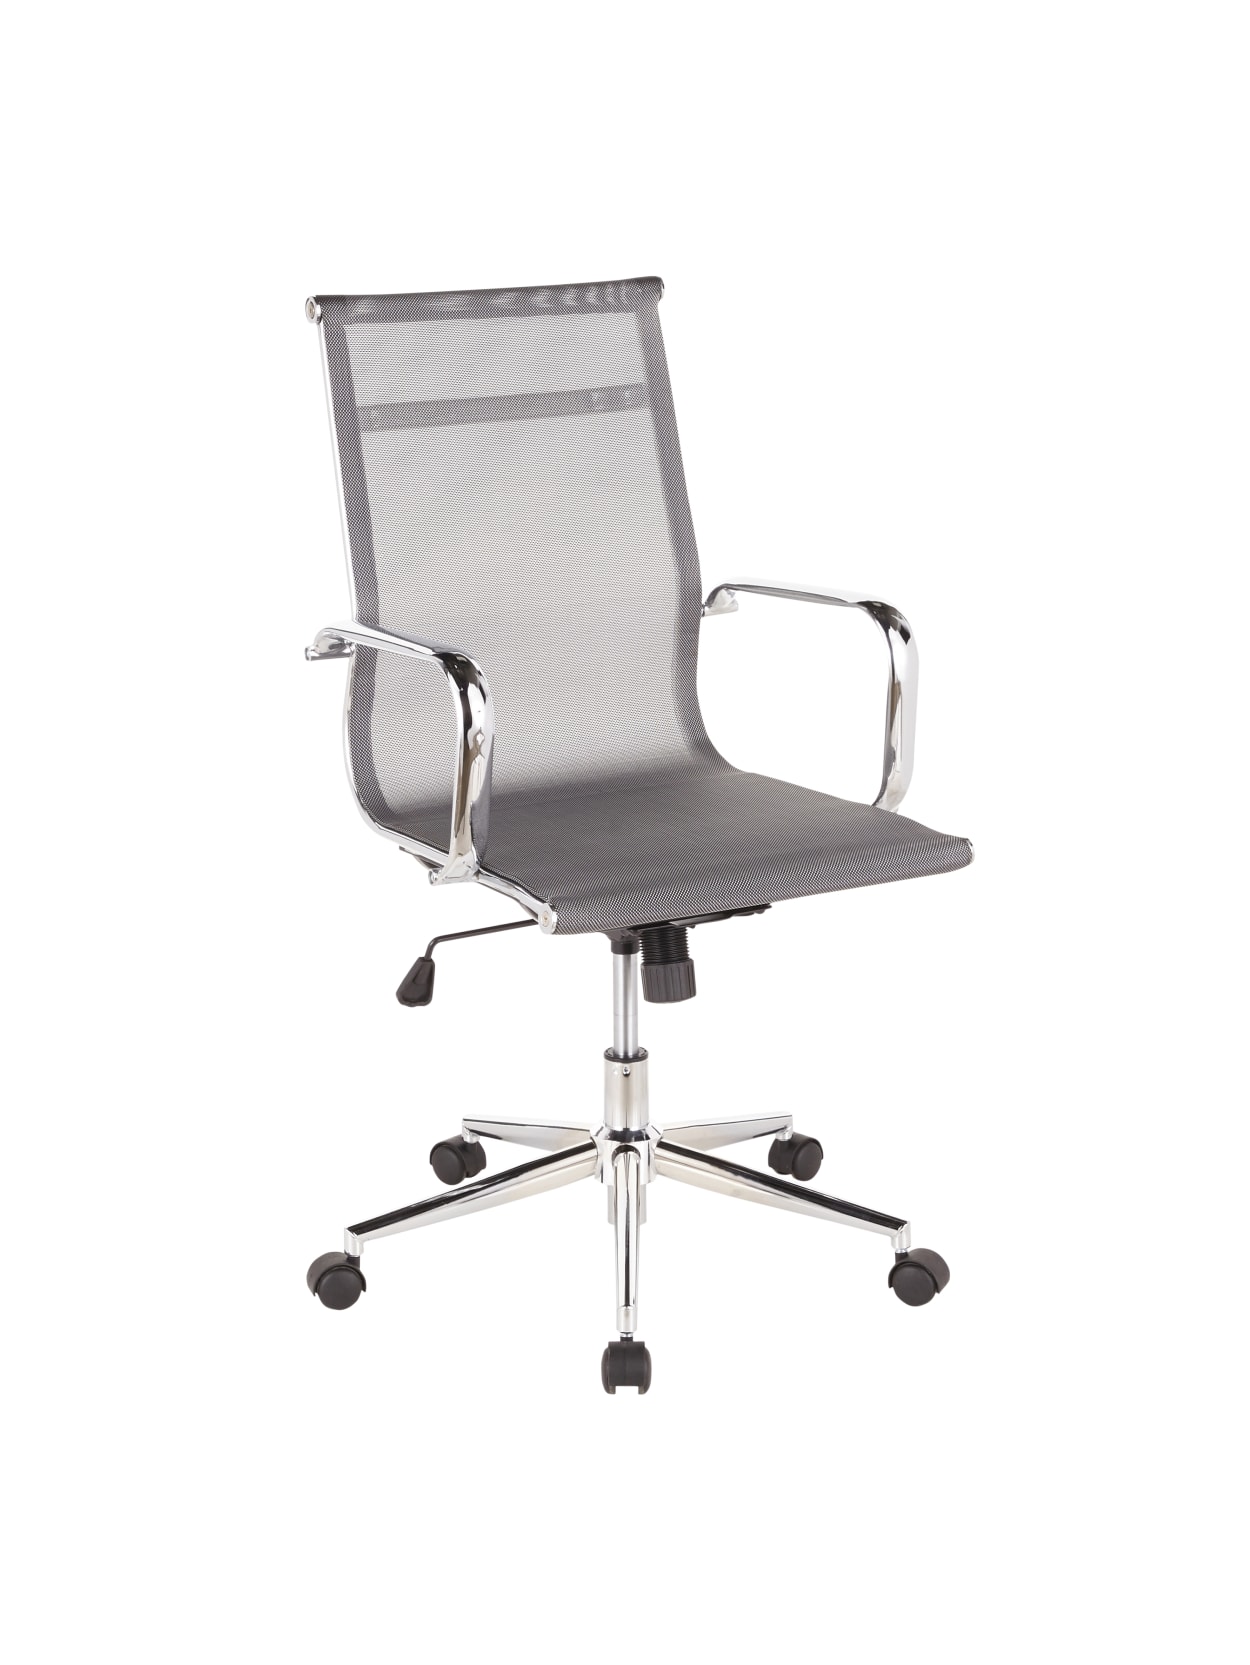 Lumisource Mirage Office Chair Chromesilver Office Depot